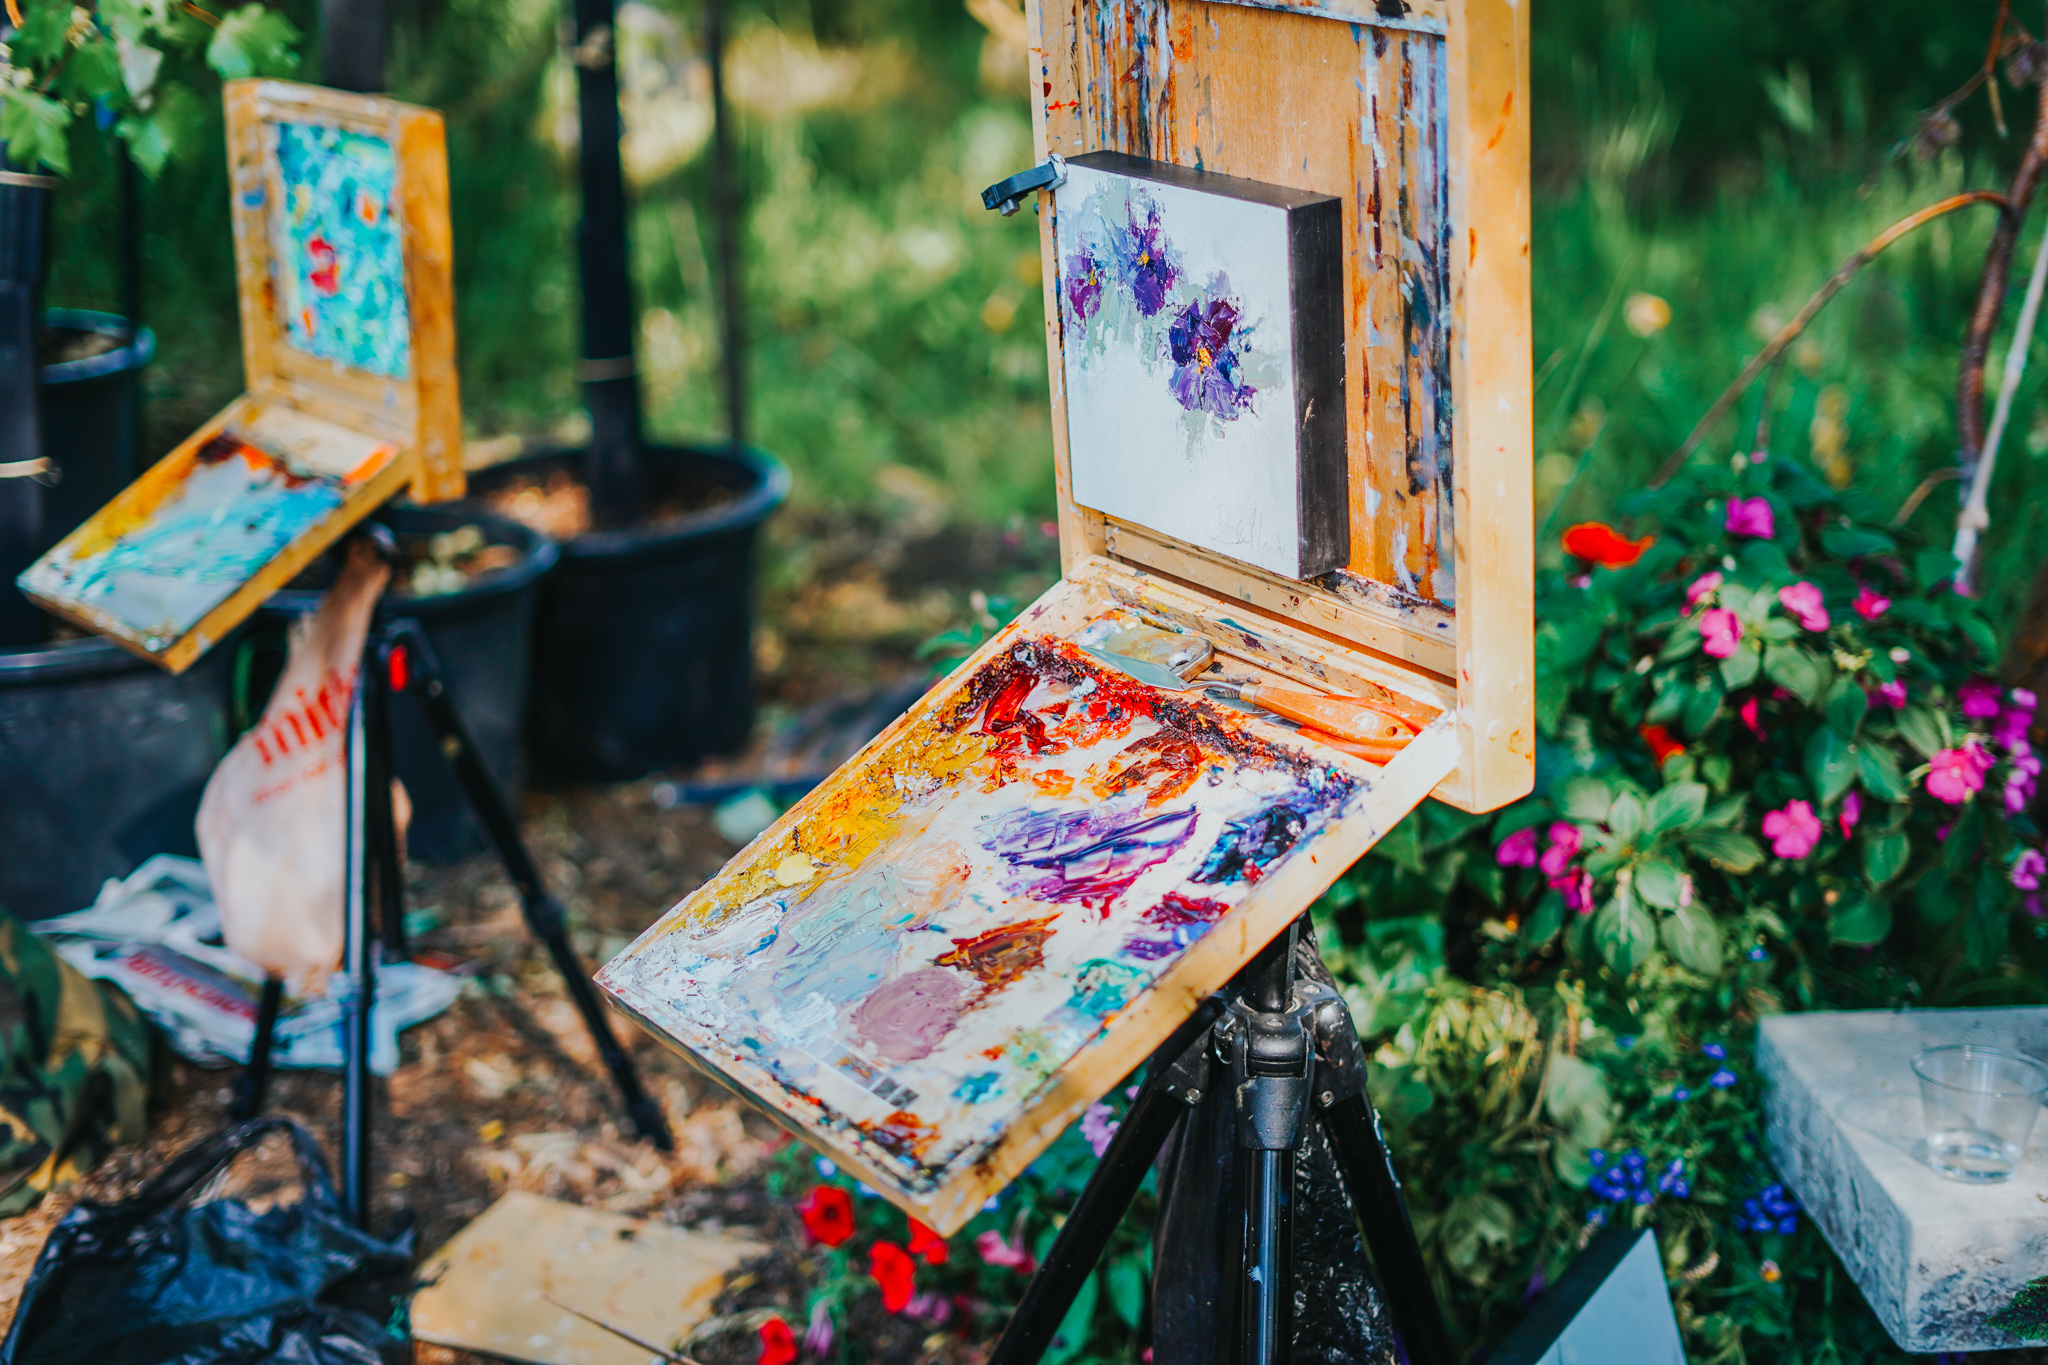 Park City Gardens Plein Air Paint Out, with Gallery MAR